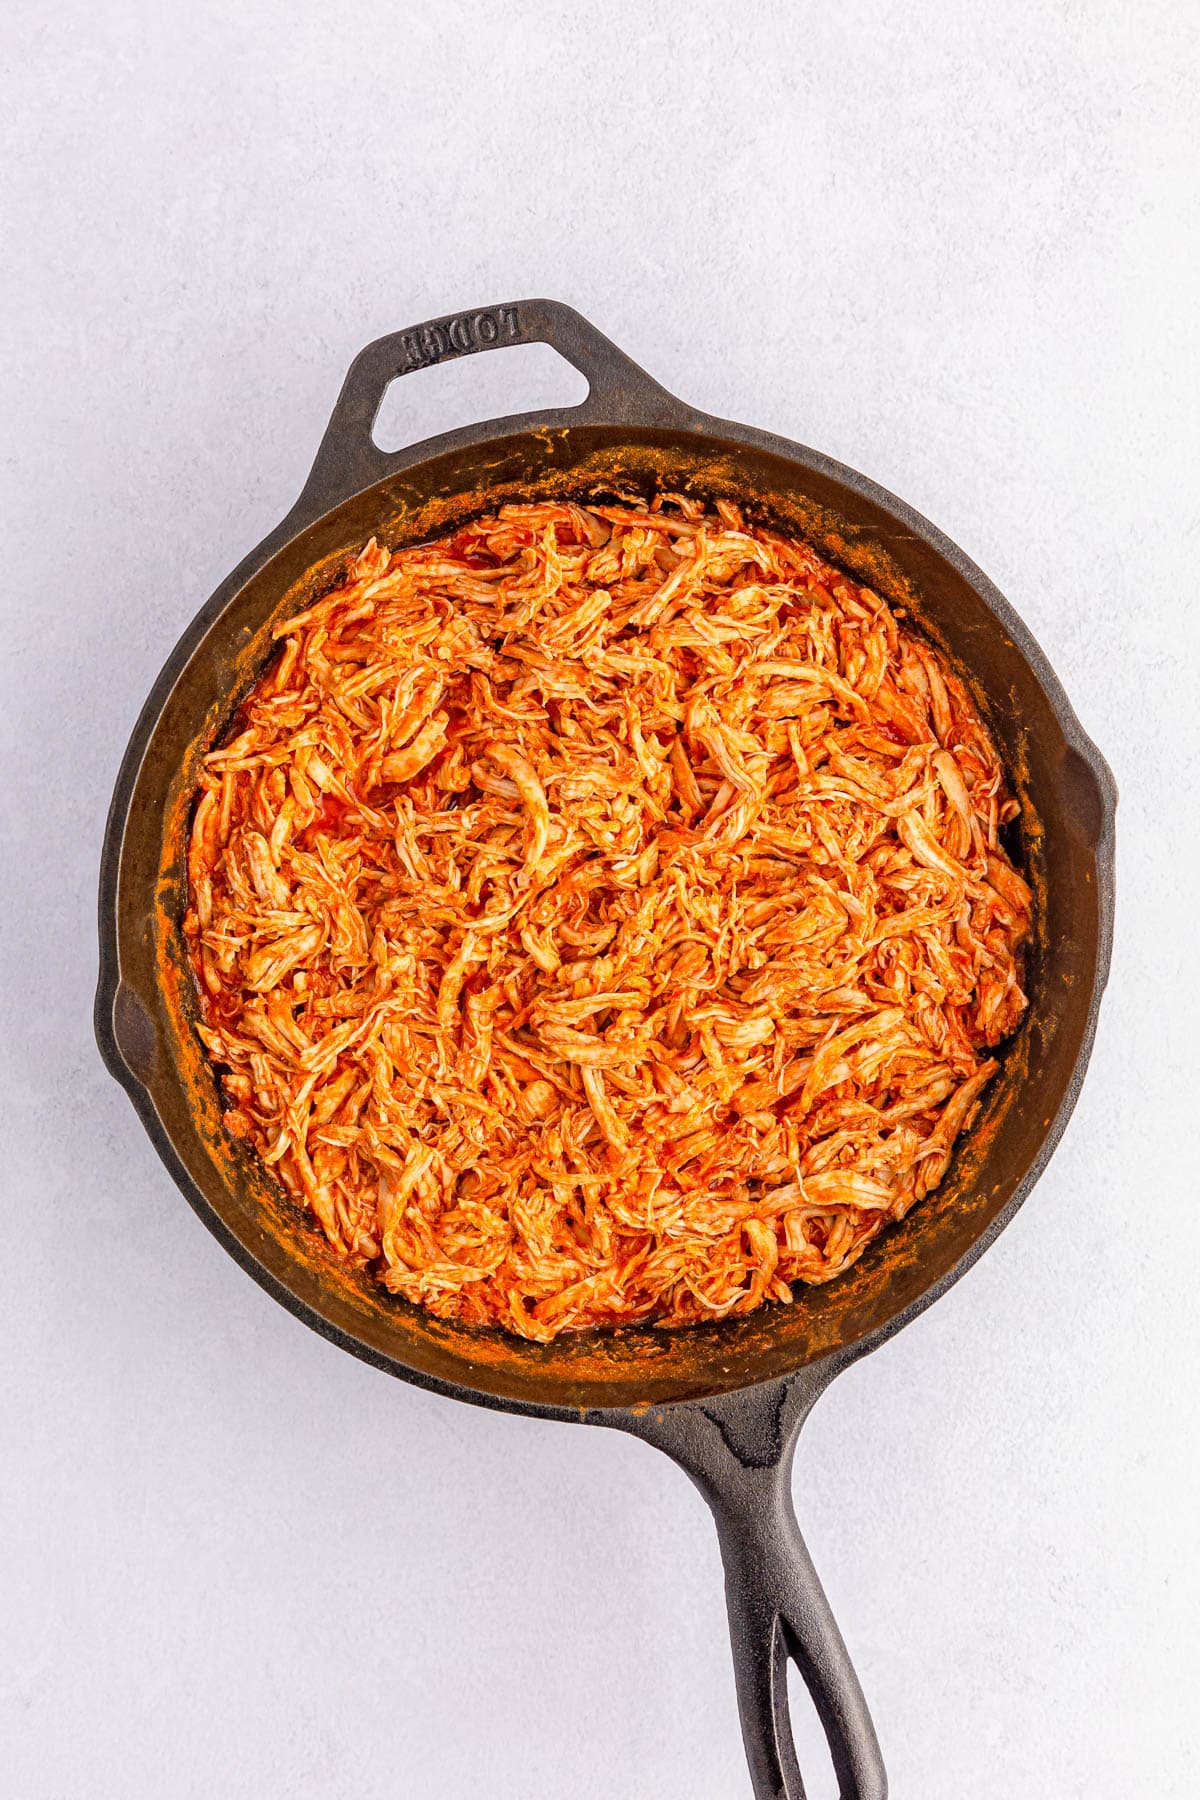 Shredded chicken mixed with hot sauce in iron skillet